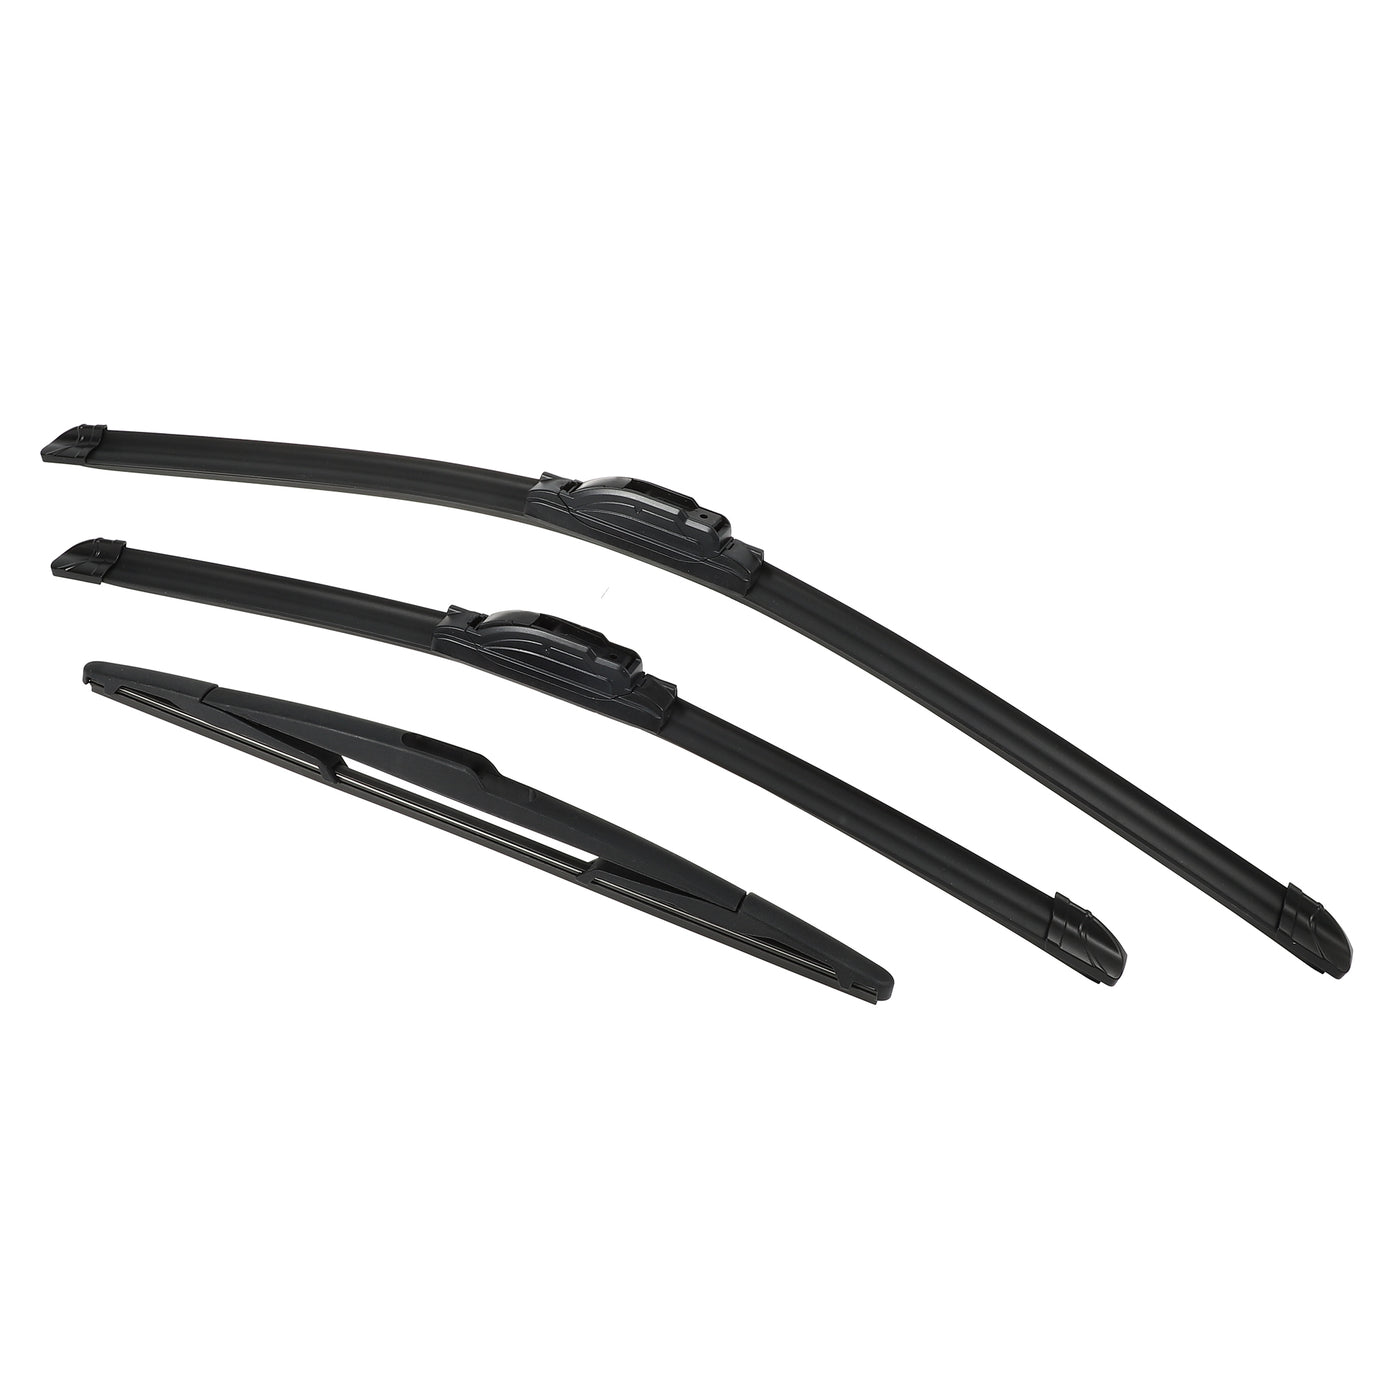 ACROPIX Front Rear Windshield Wiper Blade Set Car Wiper Blade Fit for Ford Edge 2007-2014 - Pack of 3 Black